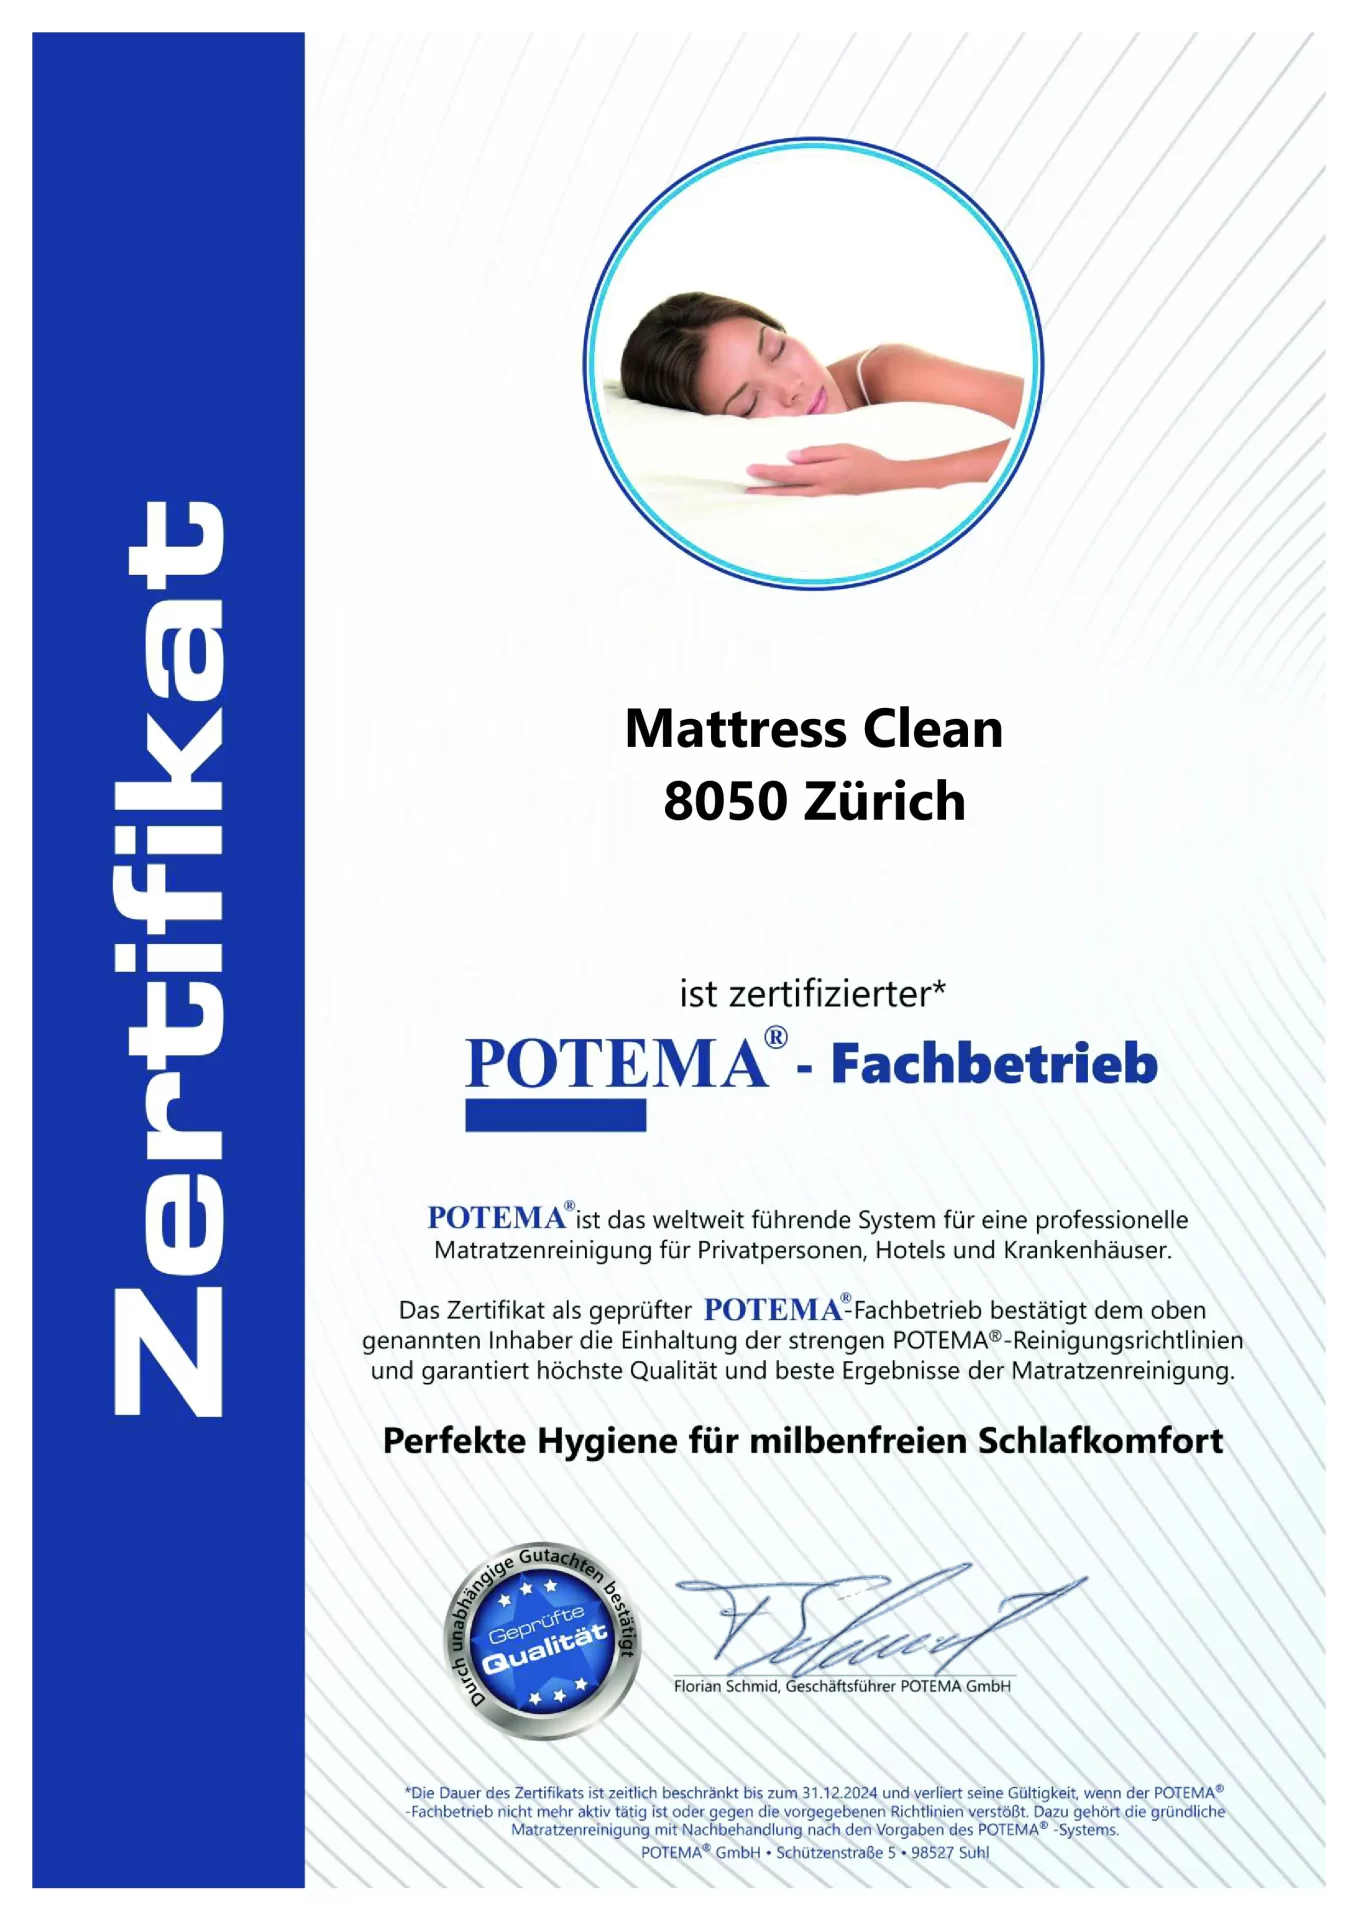 Potema certified mattress cleaning company